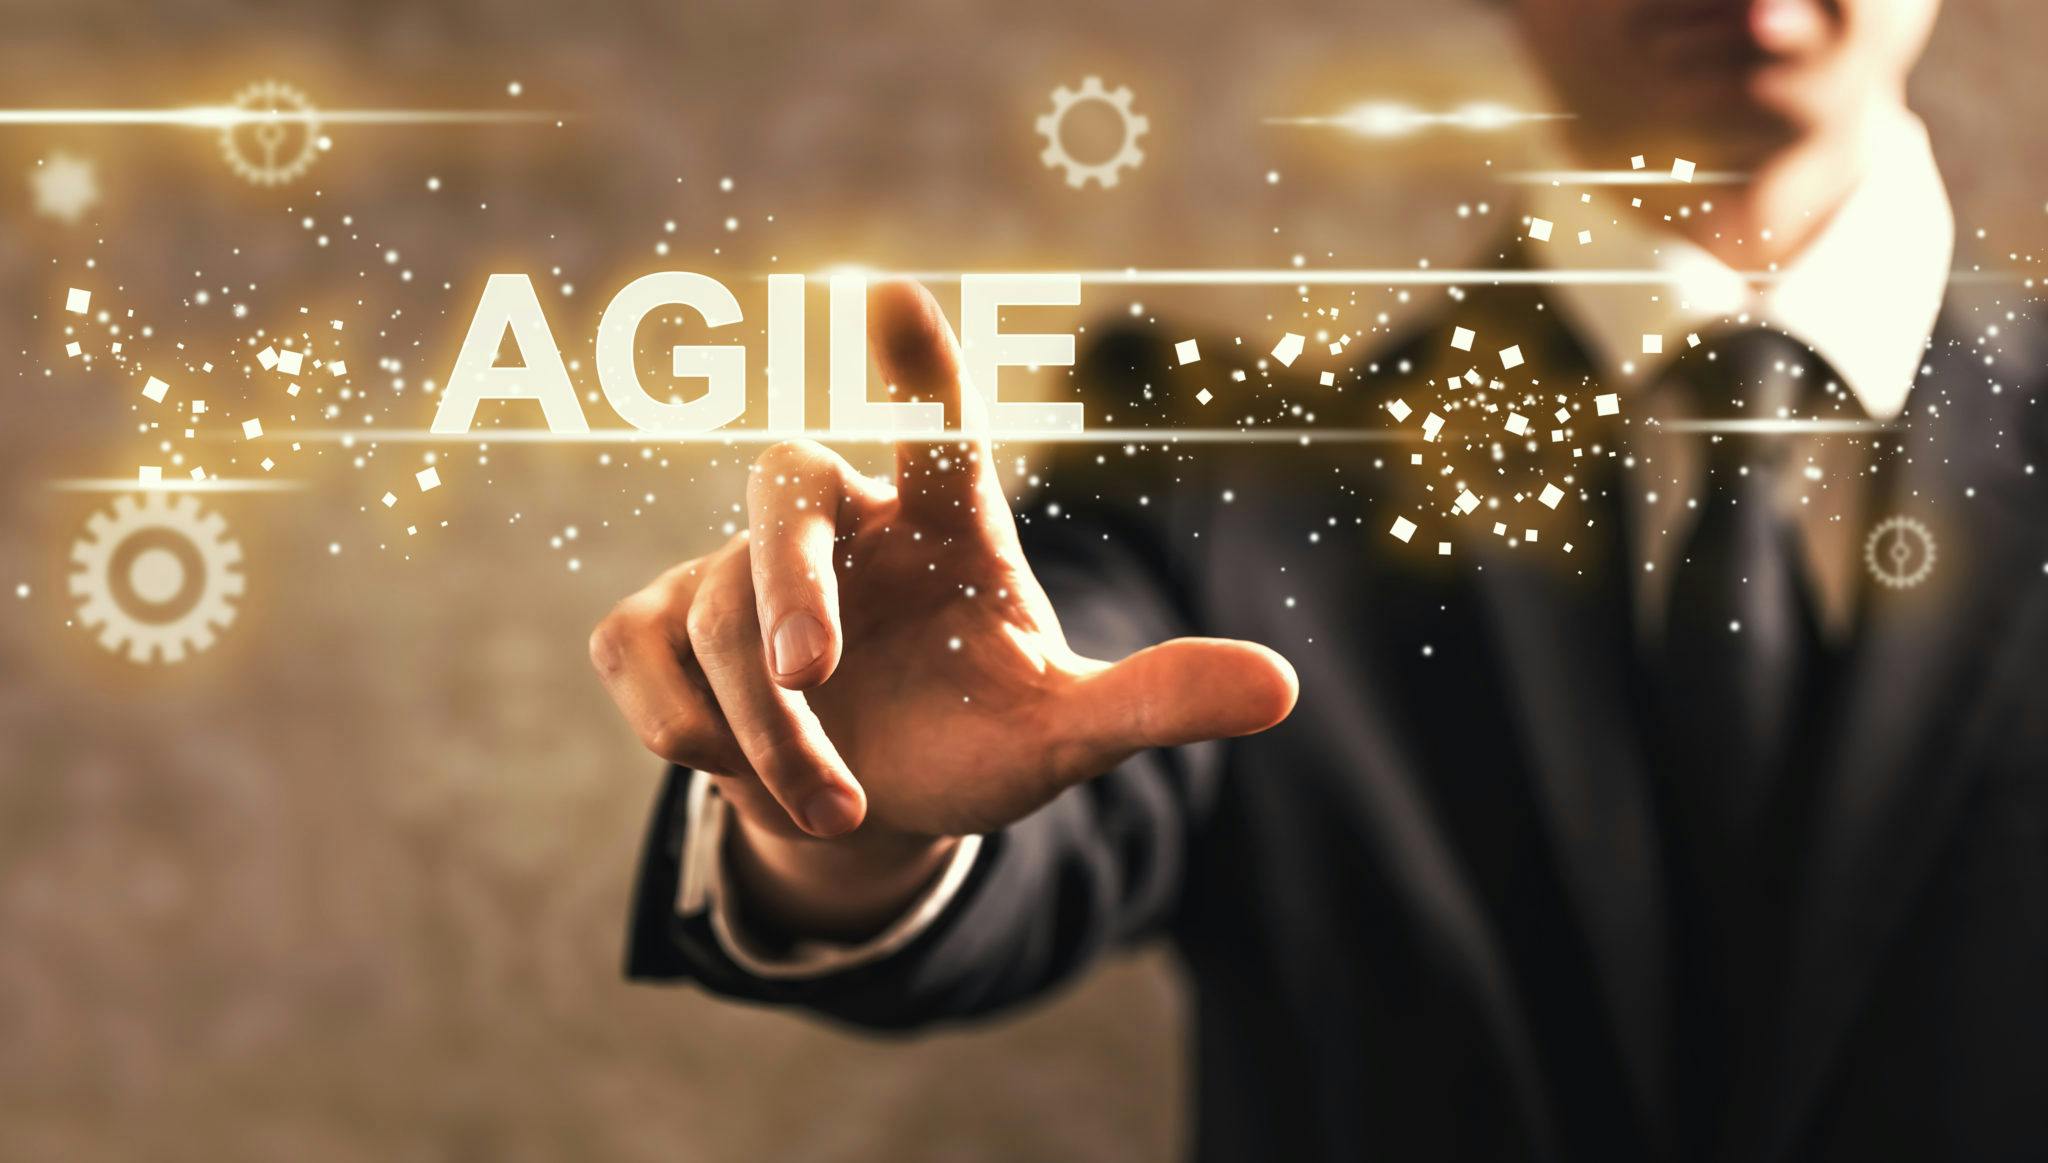 Agile training - unlock your delivery team's potential